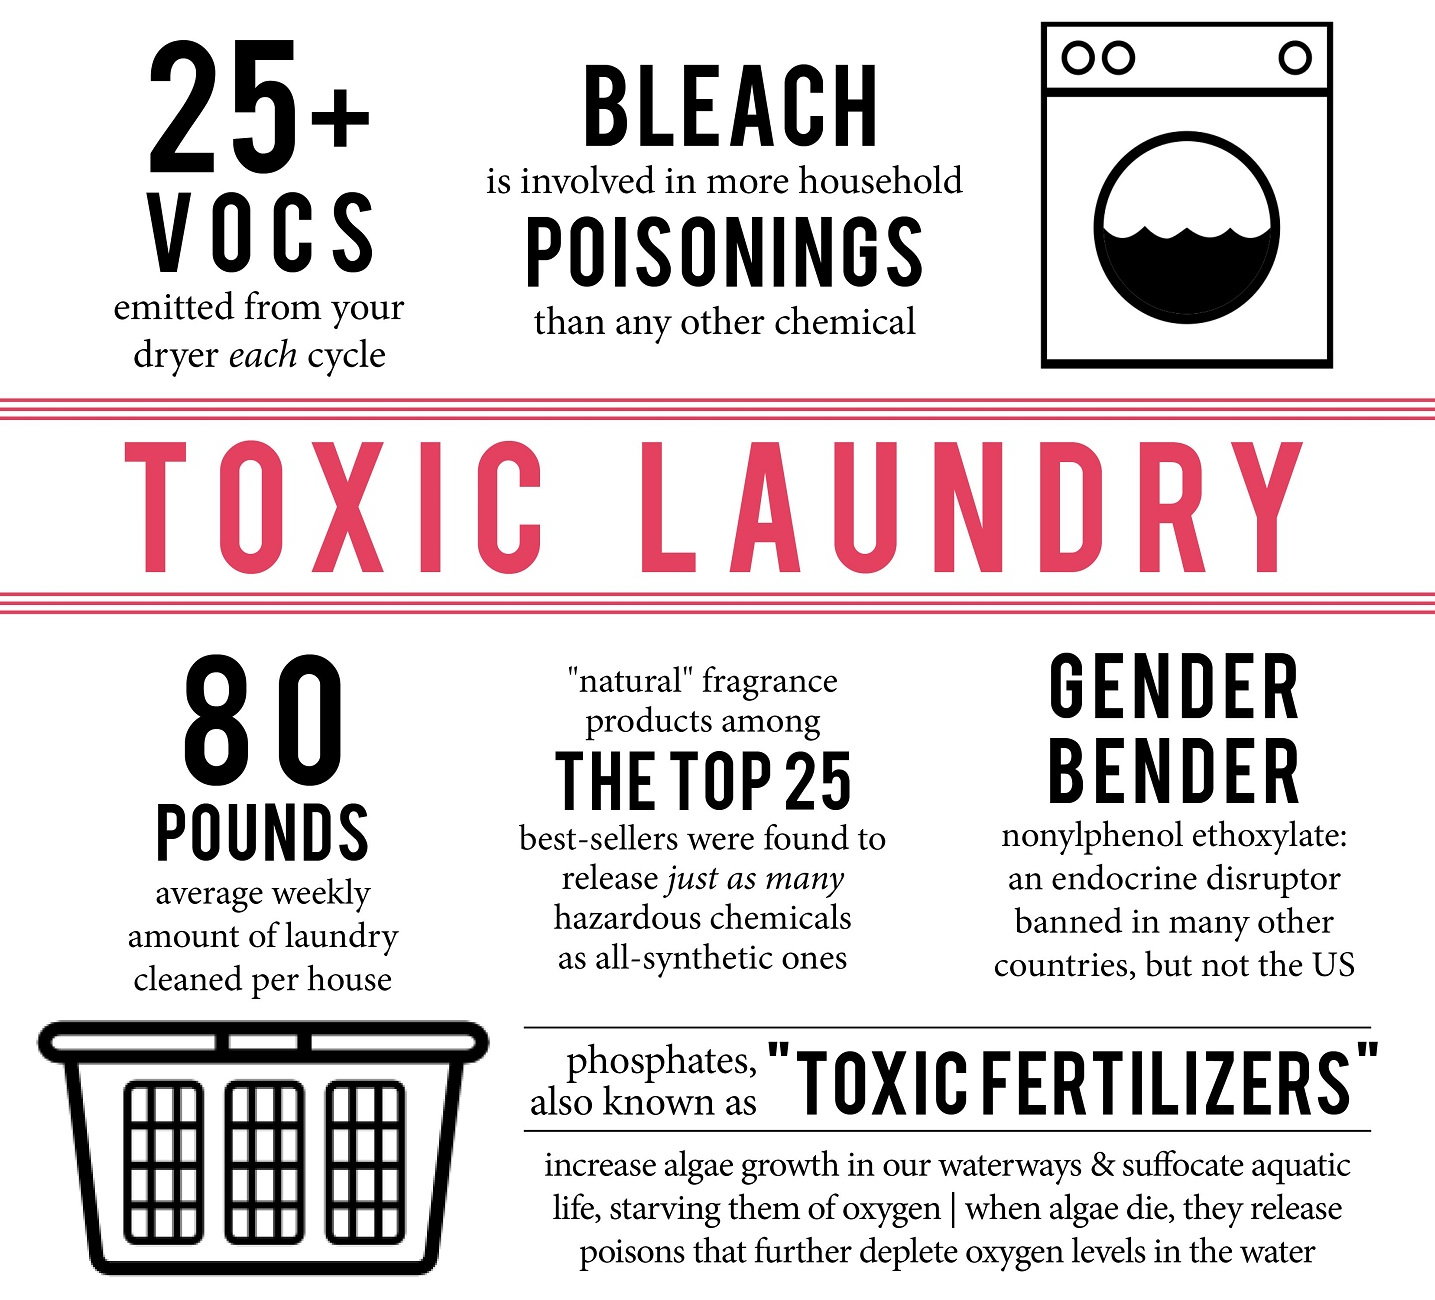 VOCs in laundry products